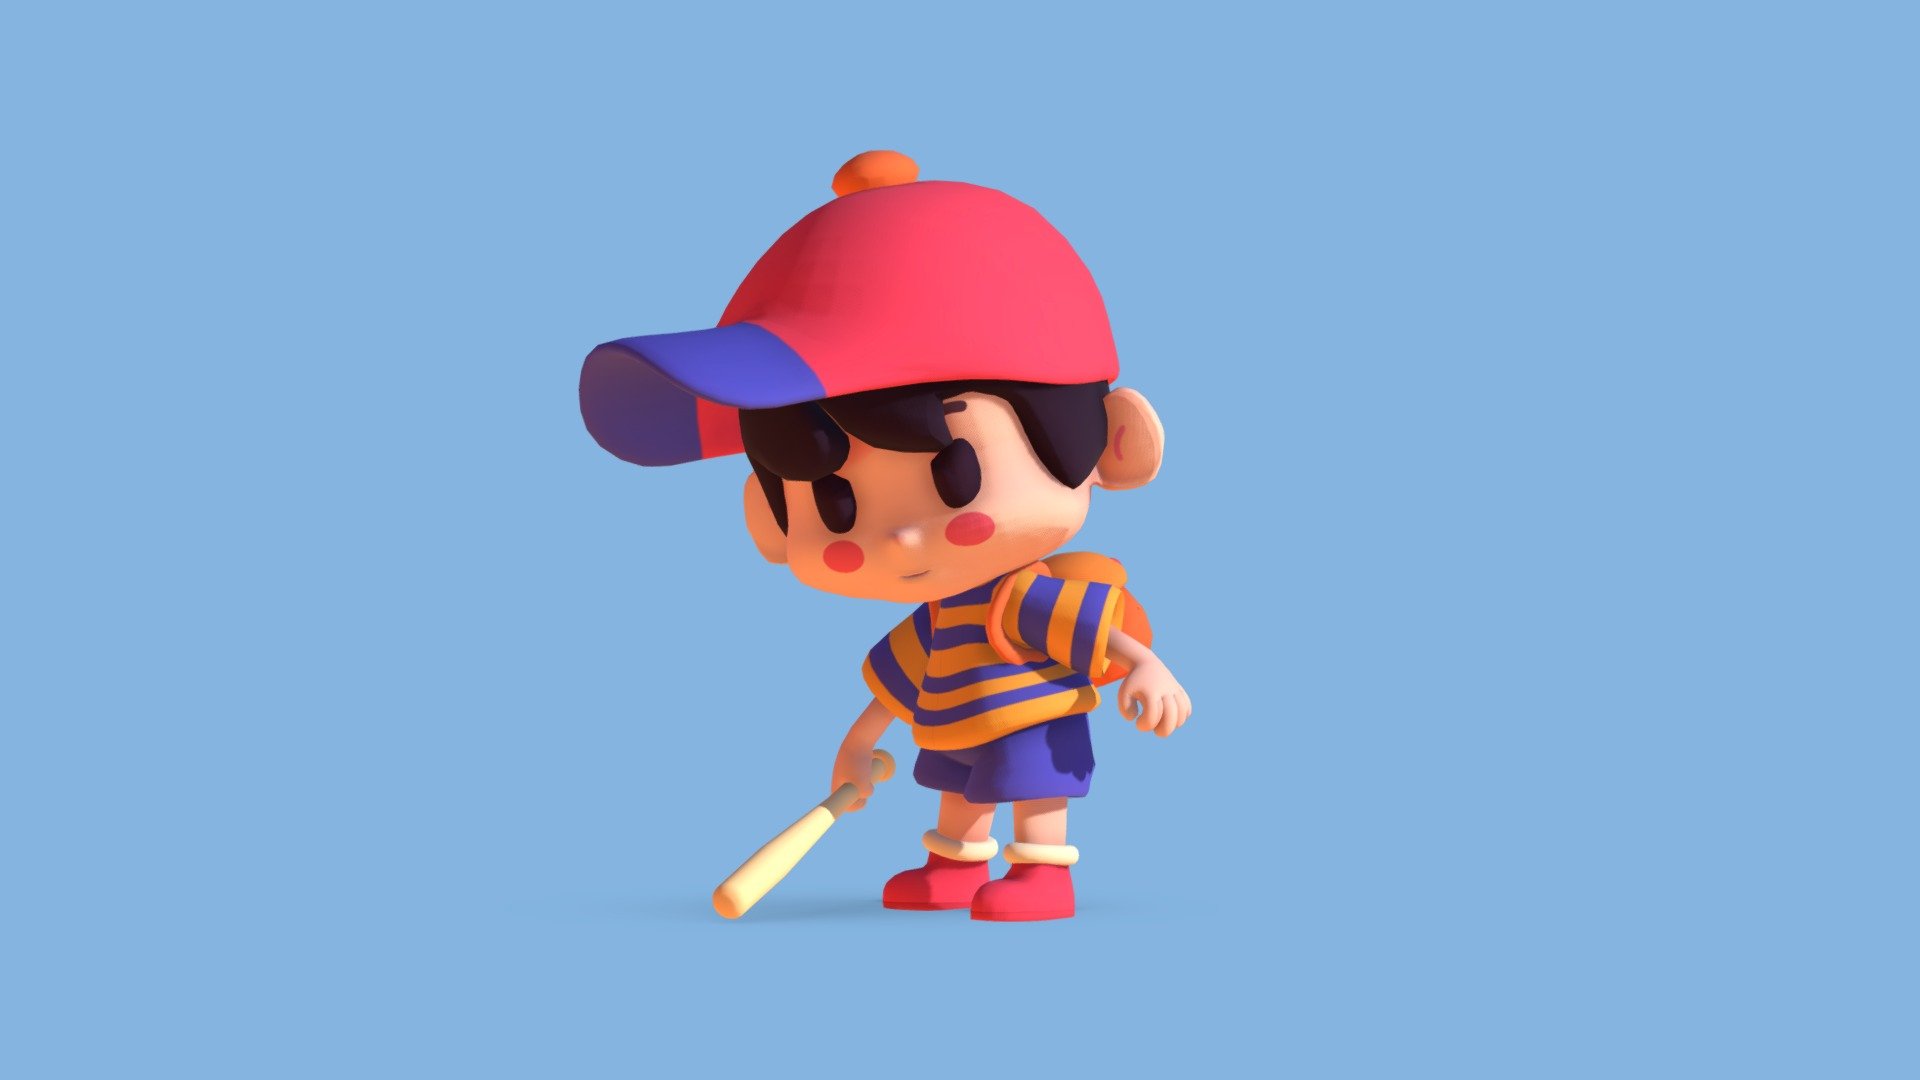 Ness - Earthbound